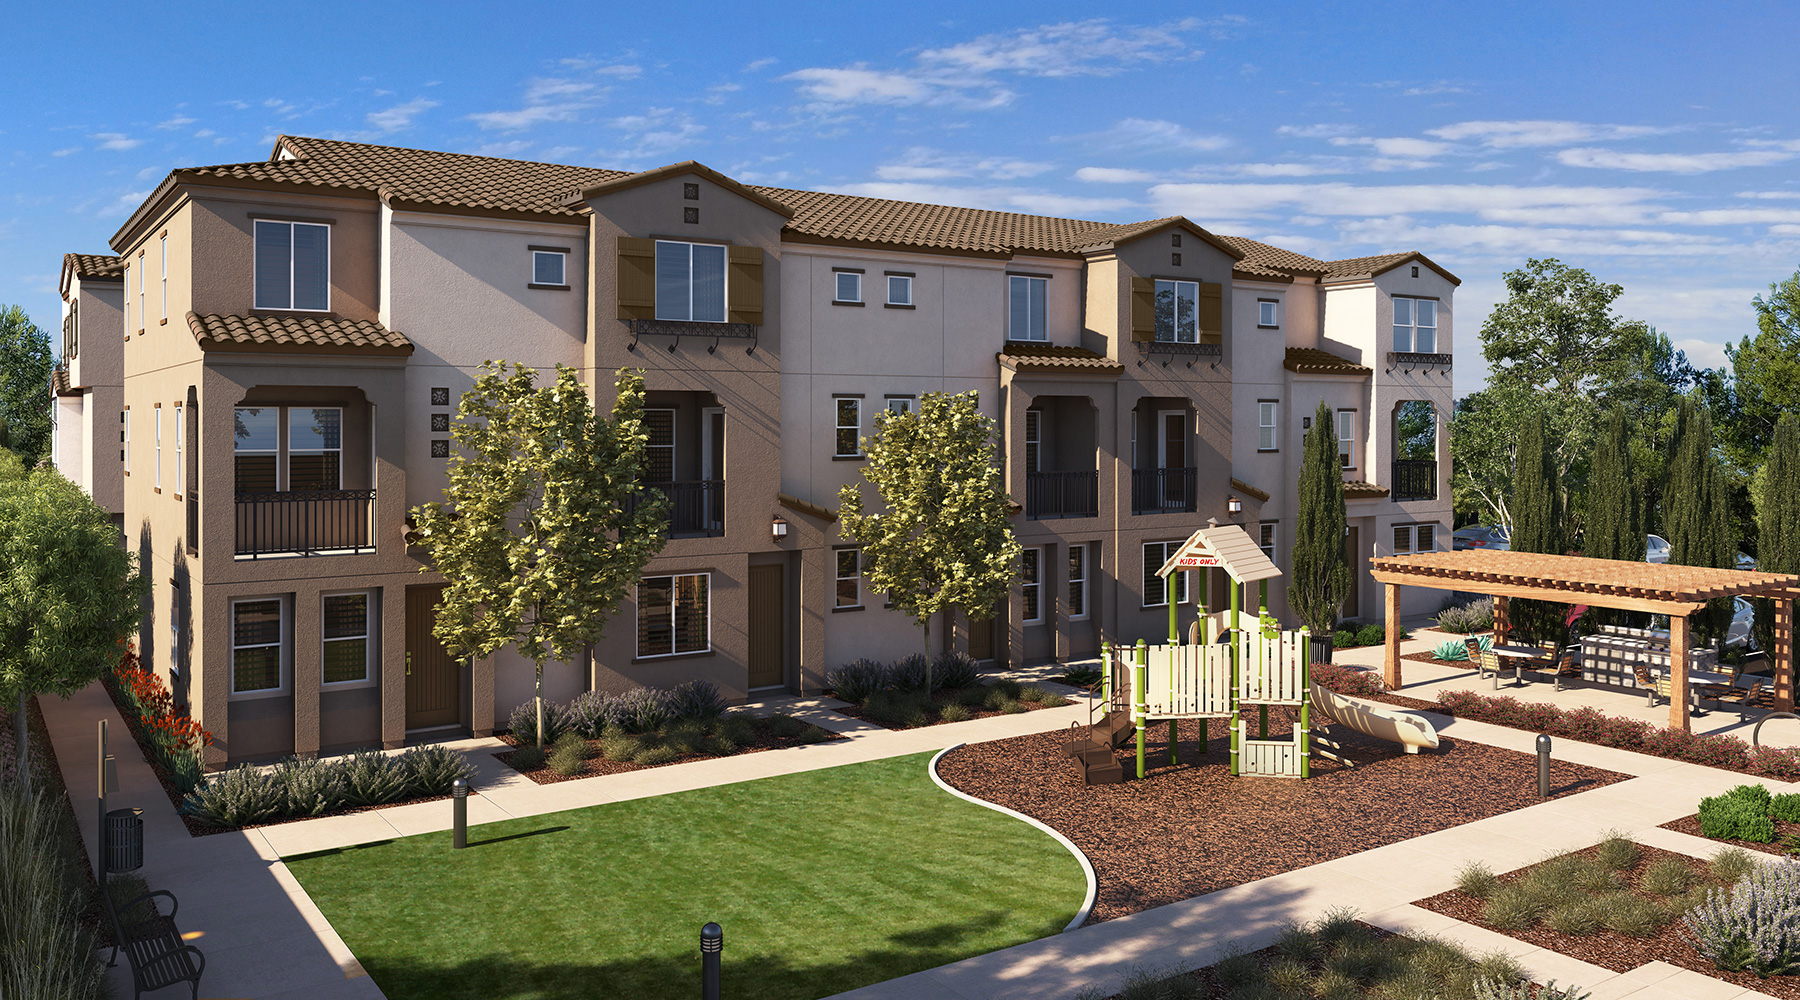 Community Tot Lot/Recreation Area at Townes at Magnolia by Melia Homes in Anaheim, CA